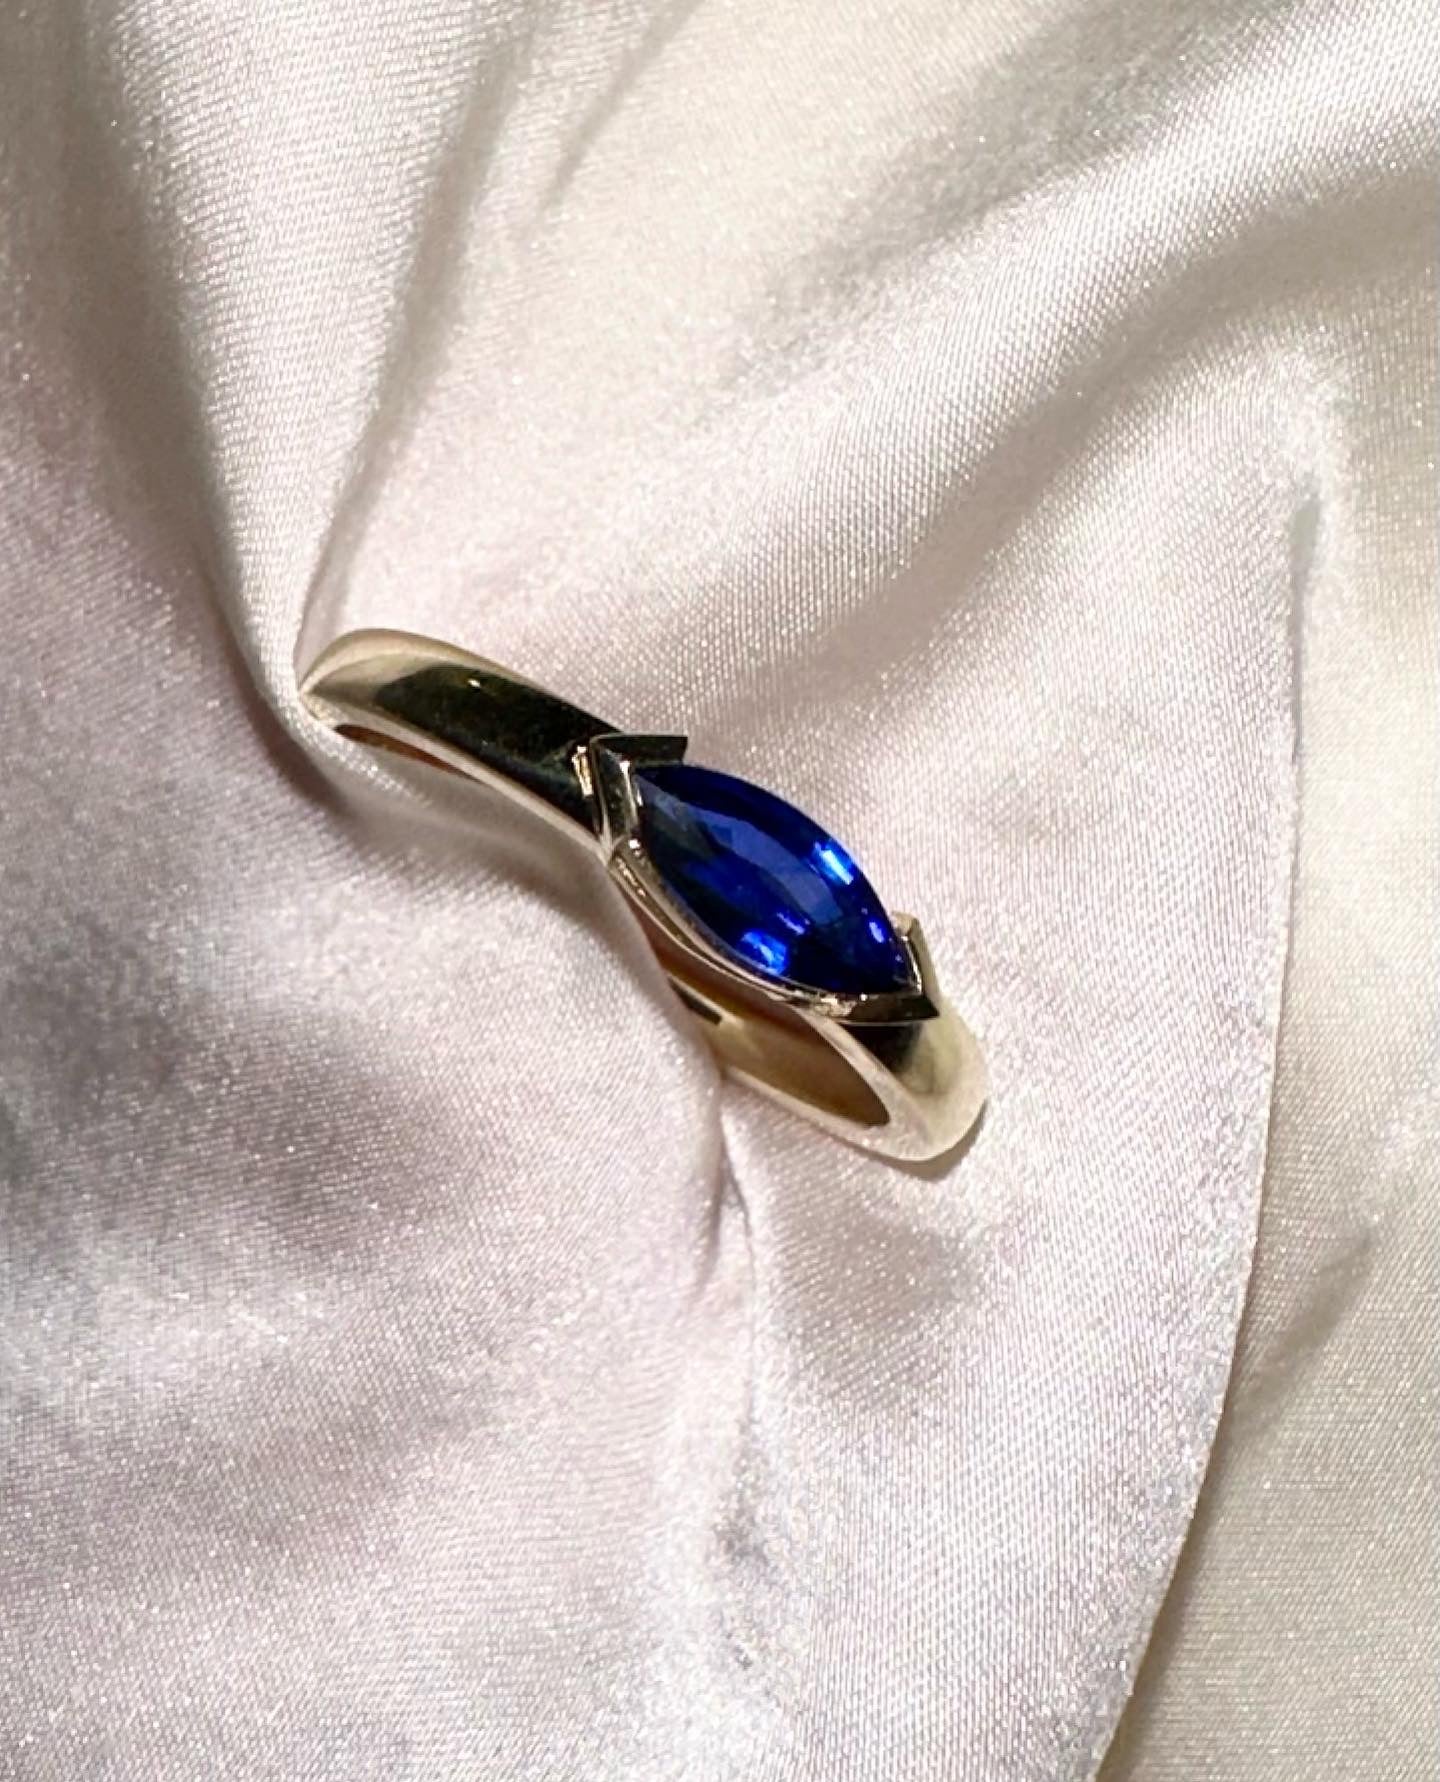 Sapphire ring. Fine jewellery, South Africa. Jewellery Cape Town. Engagement rings South Africa